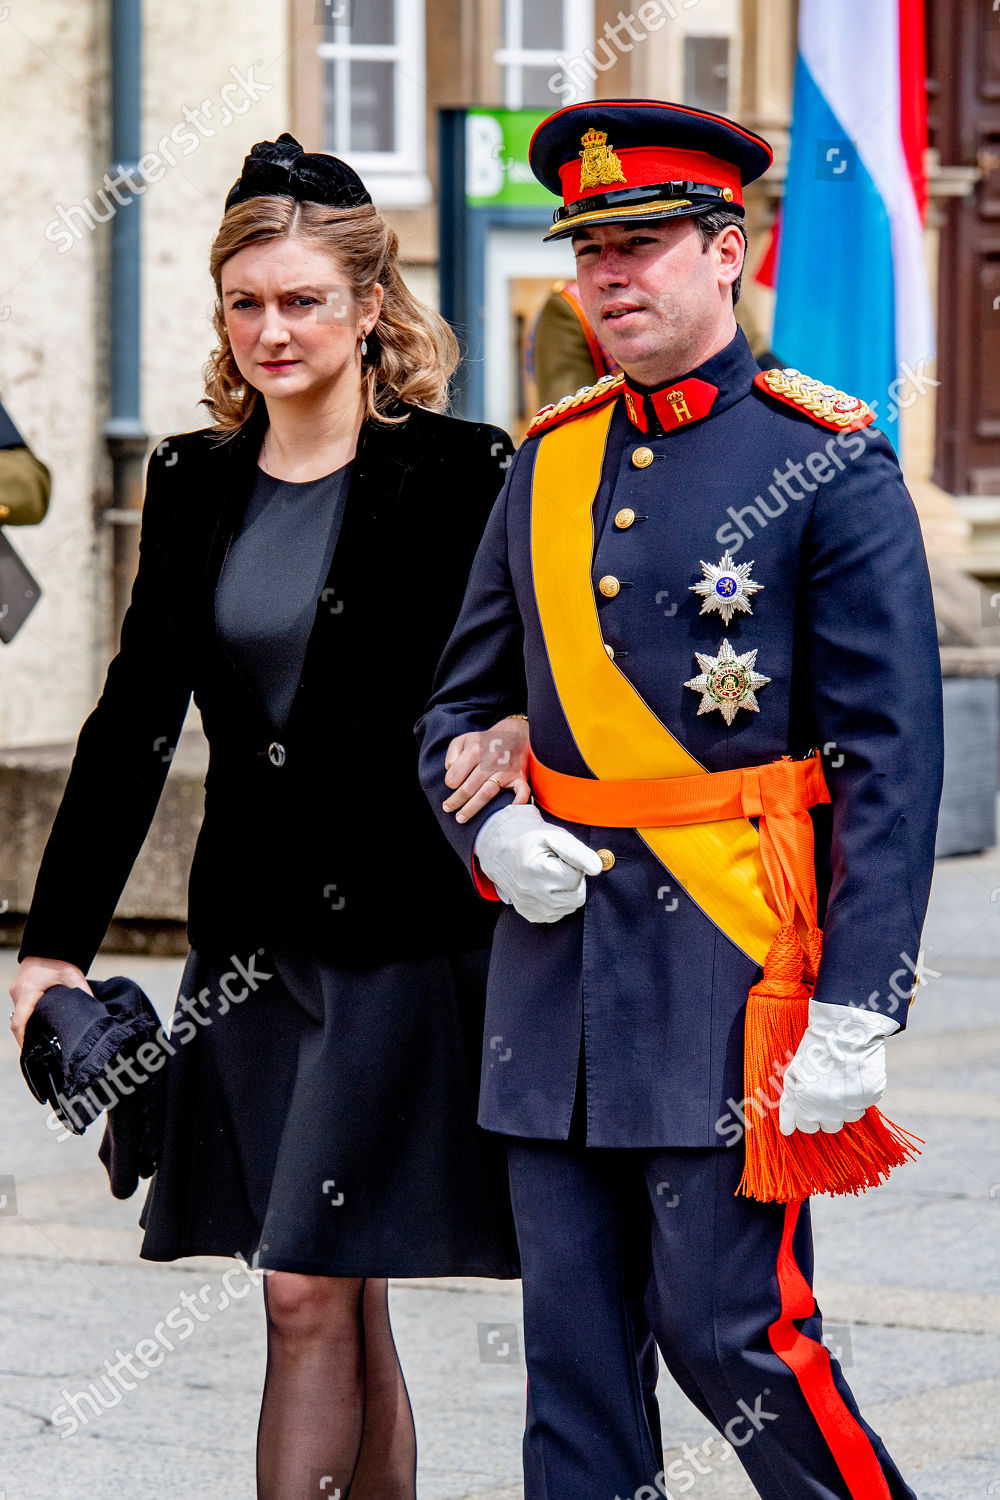 grand-duke-jean-funeral-cathedral-notre-dame-luxembourg-shutterstock-editorial-10228100hb.jpg